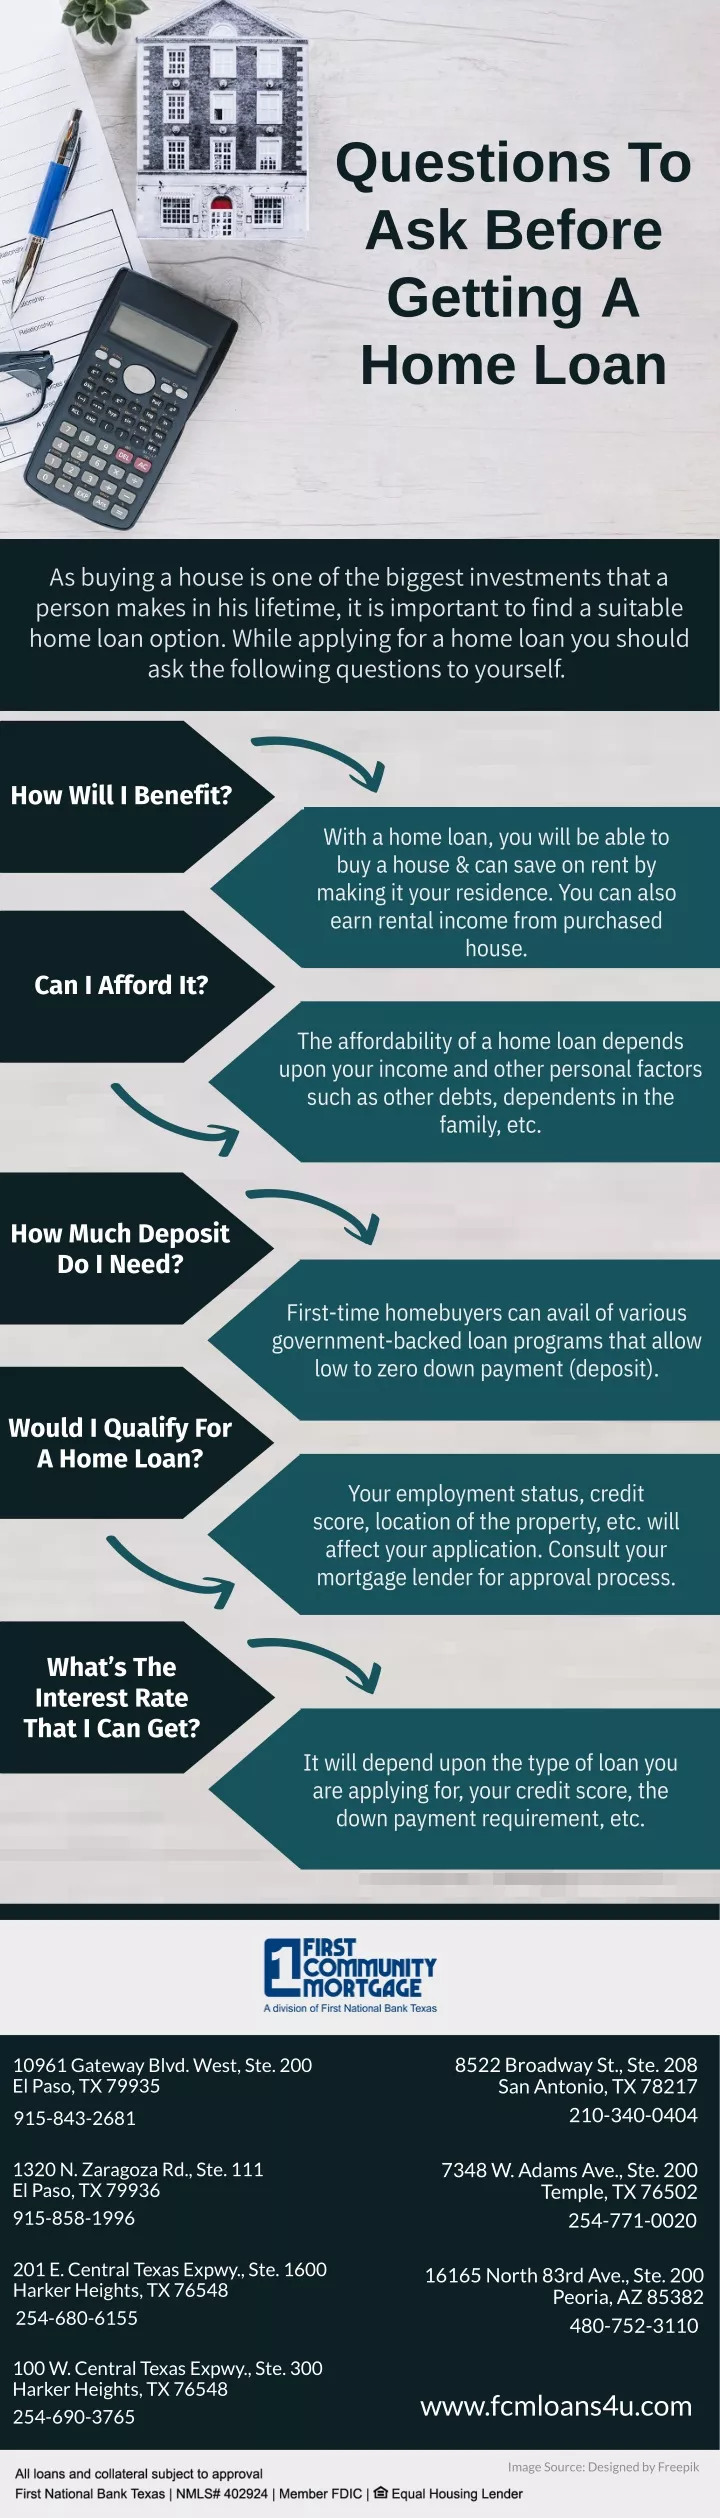 questions to ask before getting a home loan